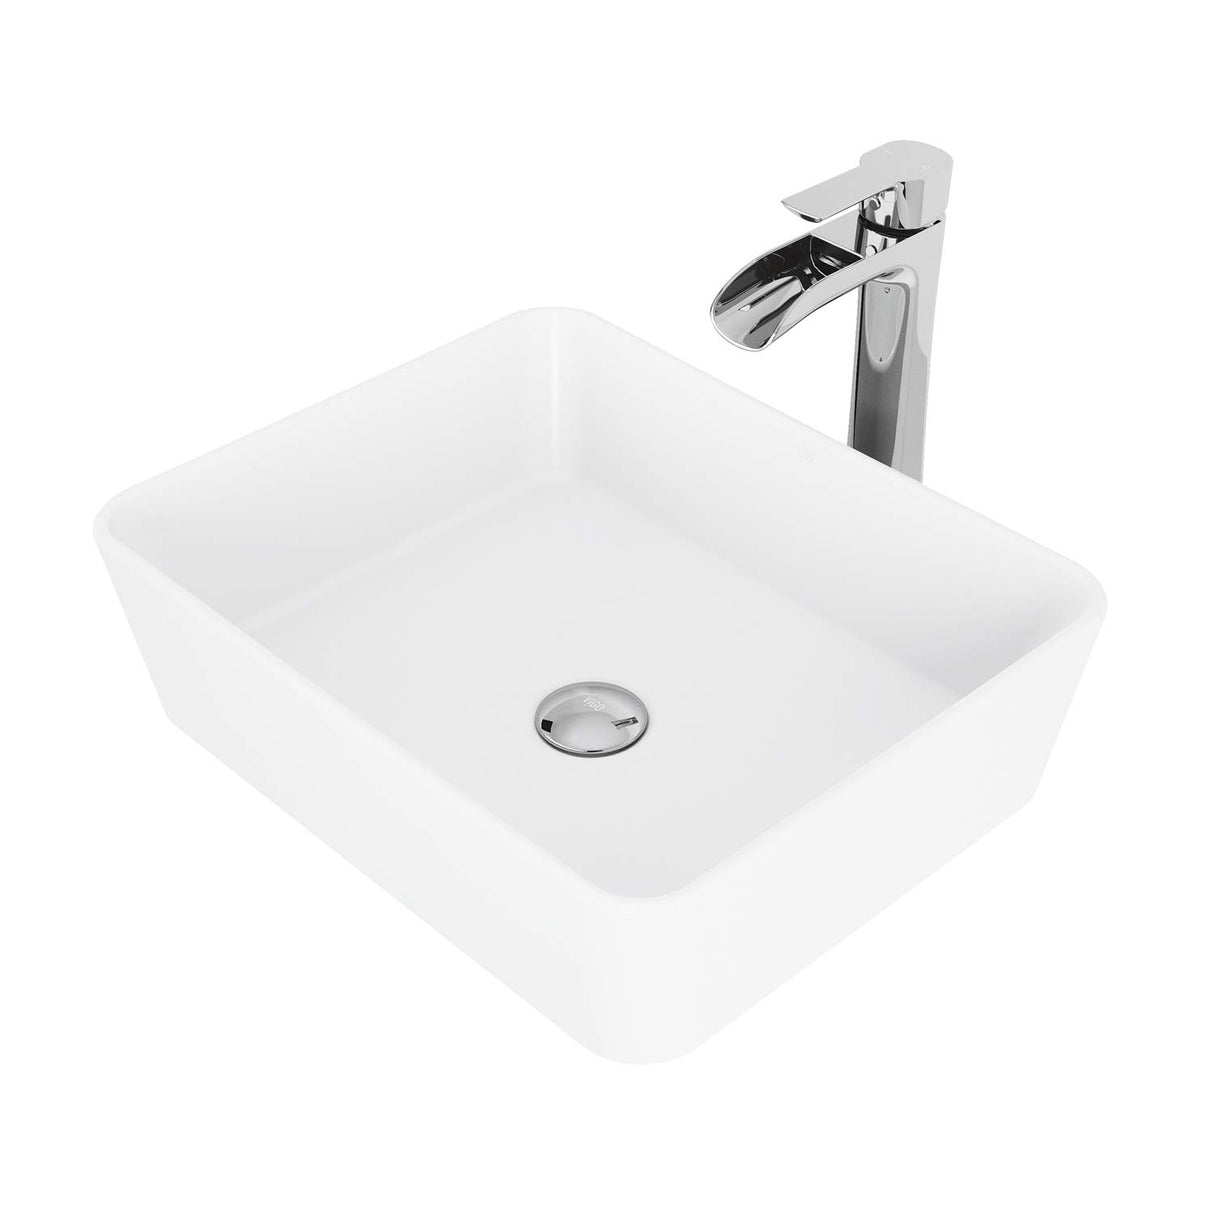 VIGO VGT1085CH 14.38" L -17.75" W -10.5" H Handmade Matte Stone Rectangle Vessel Bathroom Sink Set in Matte White Finish with Chrome Single-Handle Single Hole Waterfall Faucet and Pop Up Drain